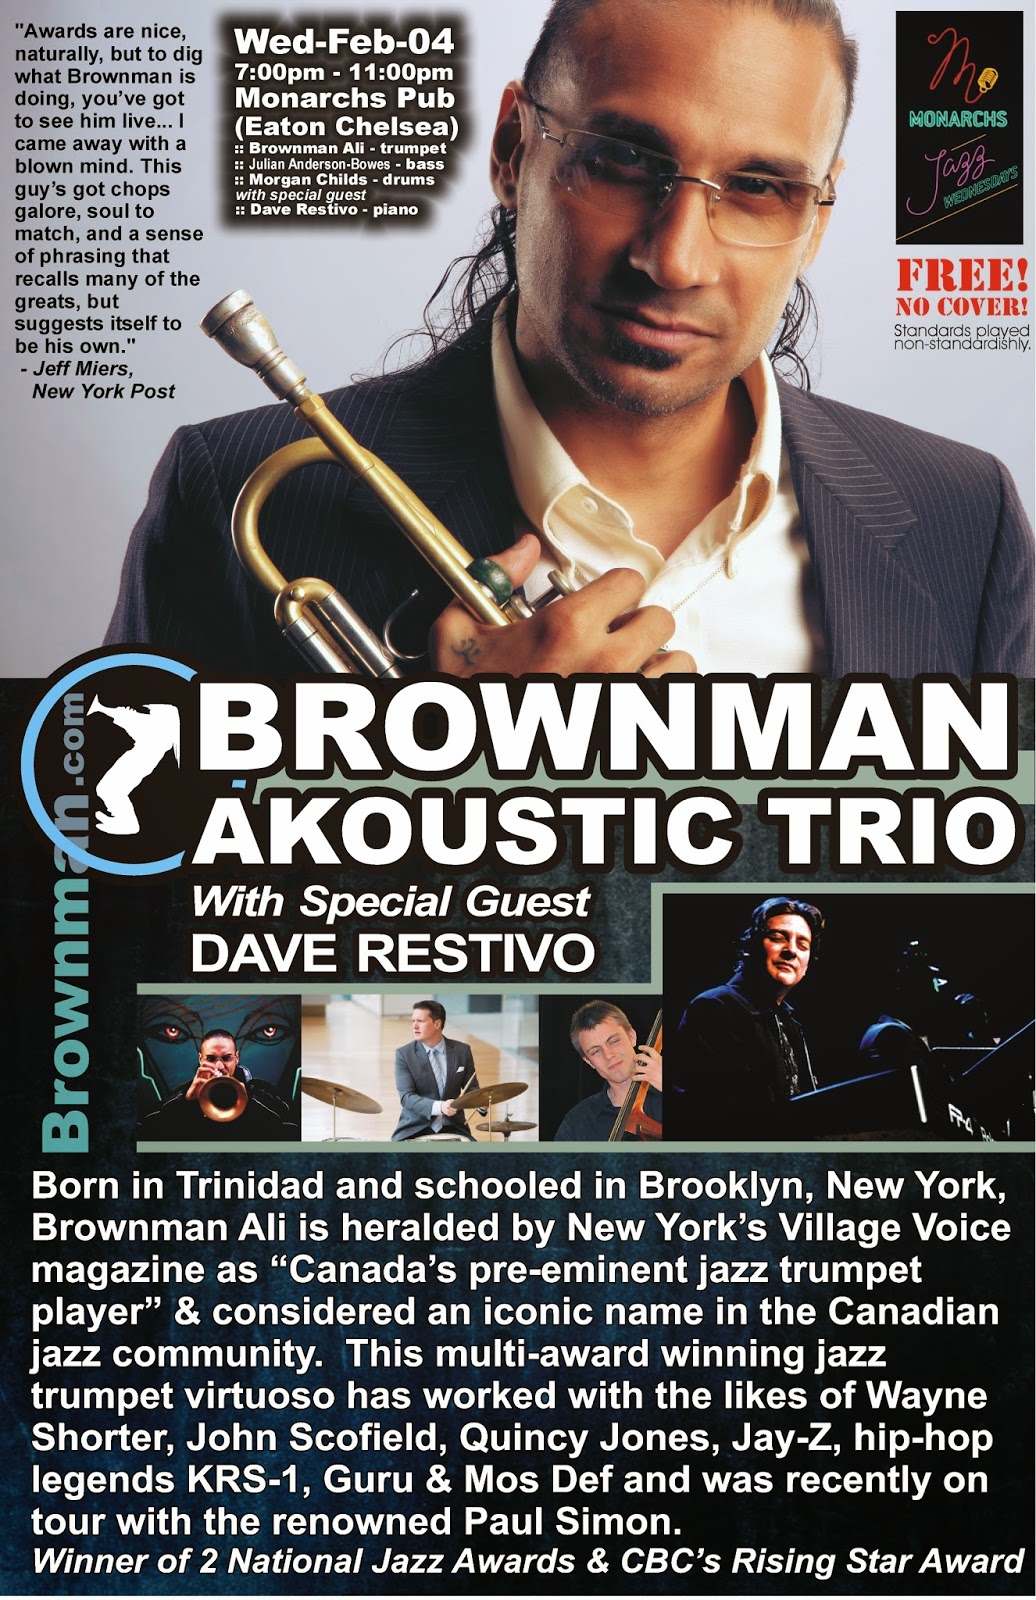 The Conrad Gayle Review: THE BROWNMAN AKOUSTIC TRIO PLUS ONE AT MONARCH ...